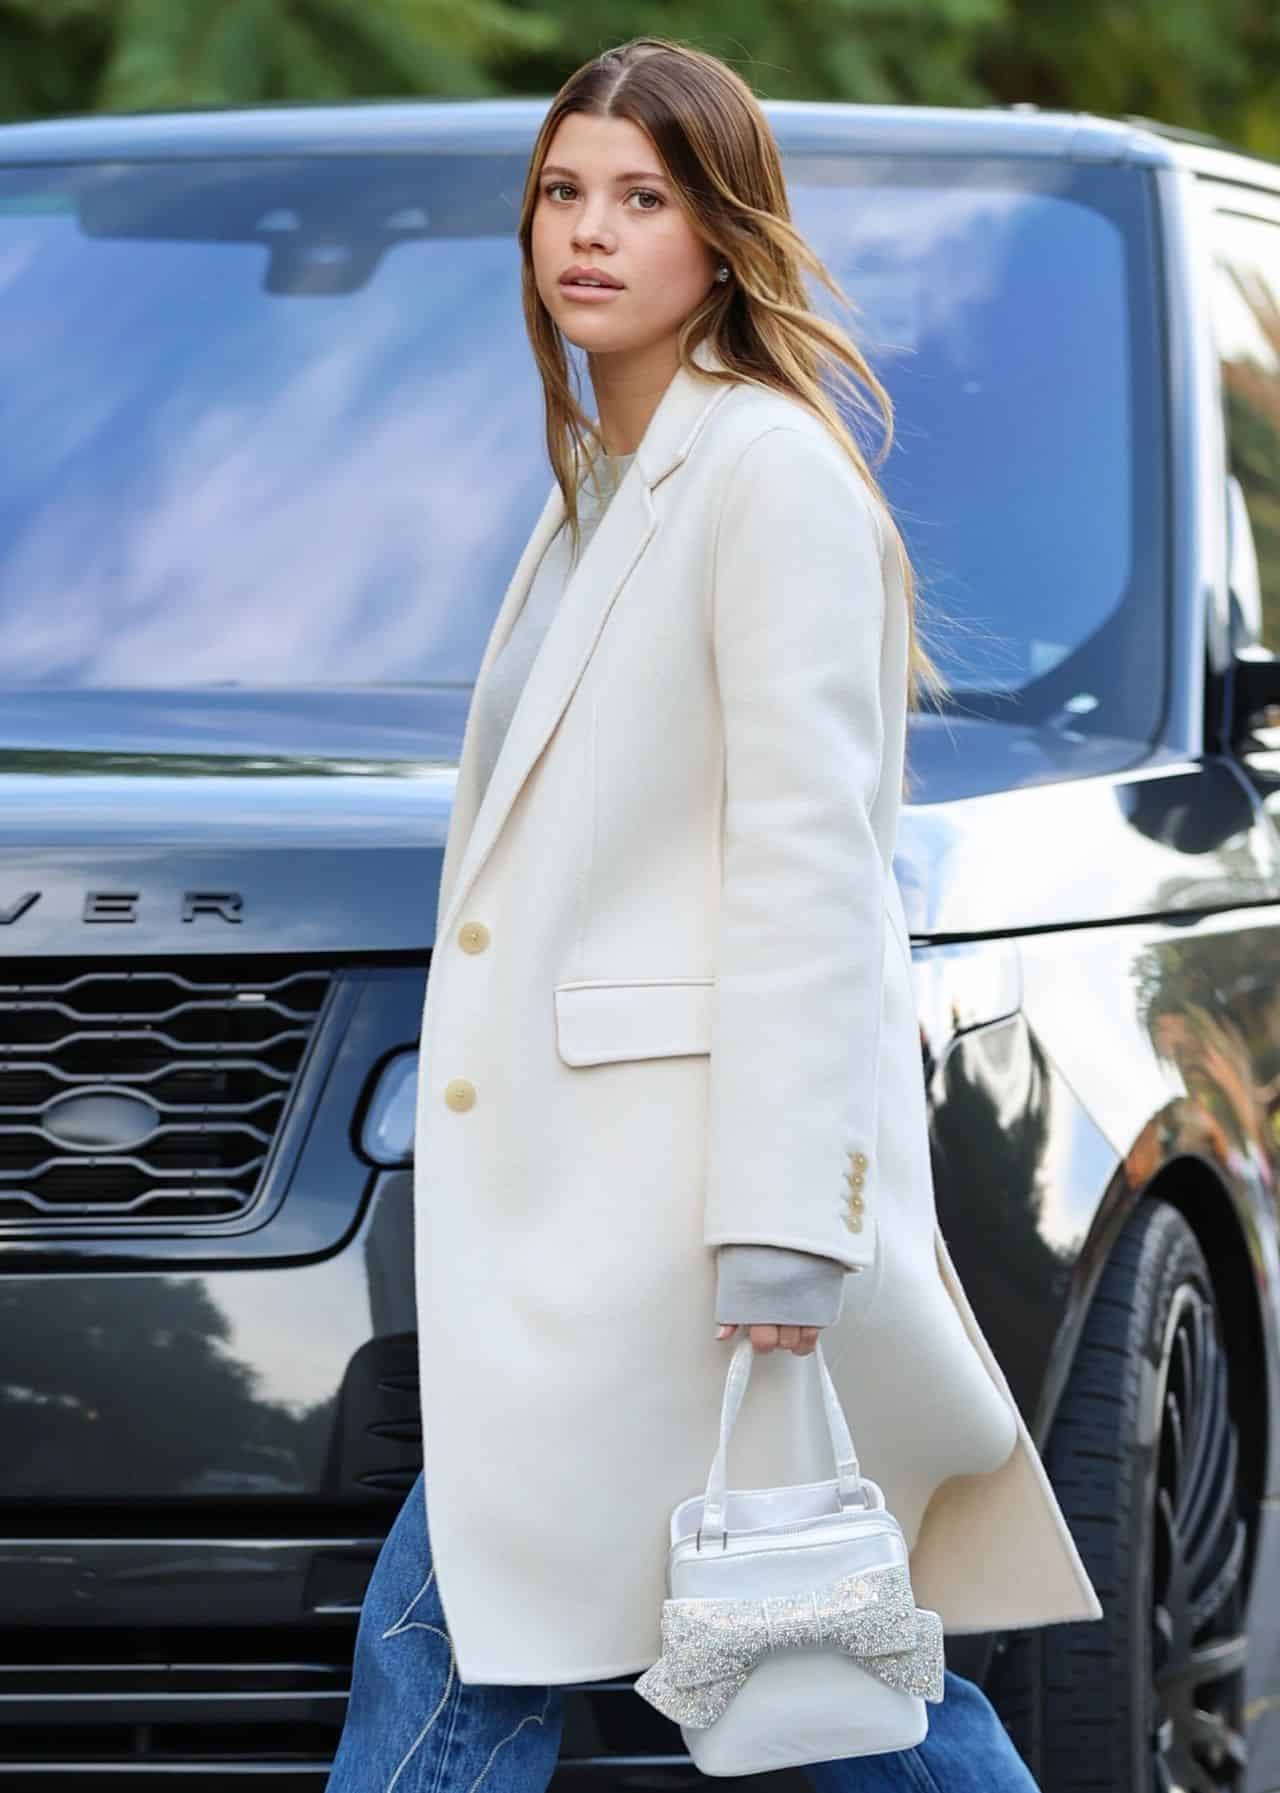 Sofia Richie Turned the Street Into a Catwalk While Running Errands